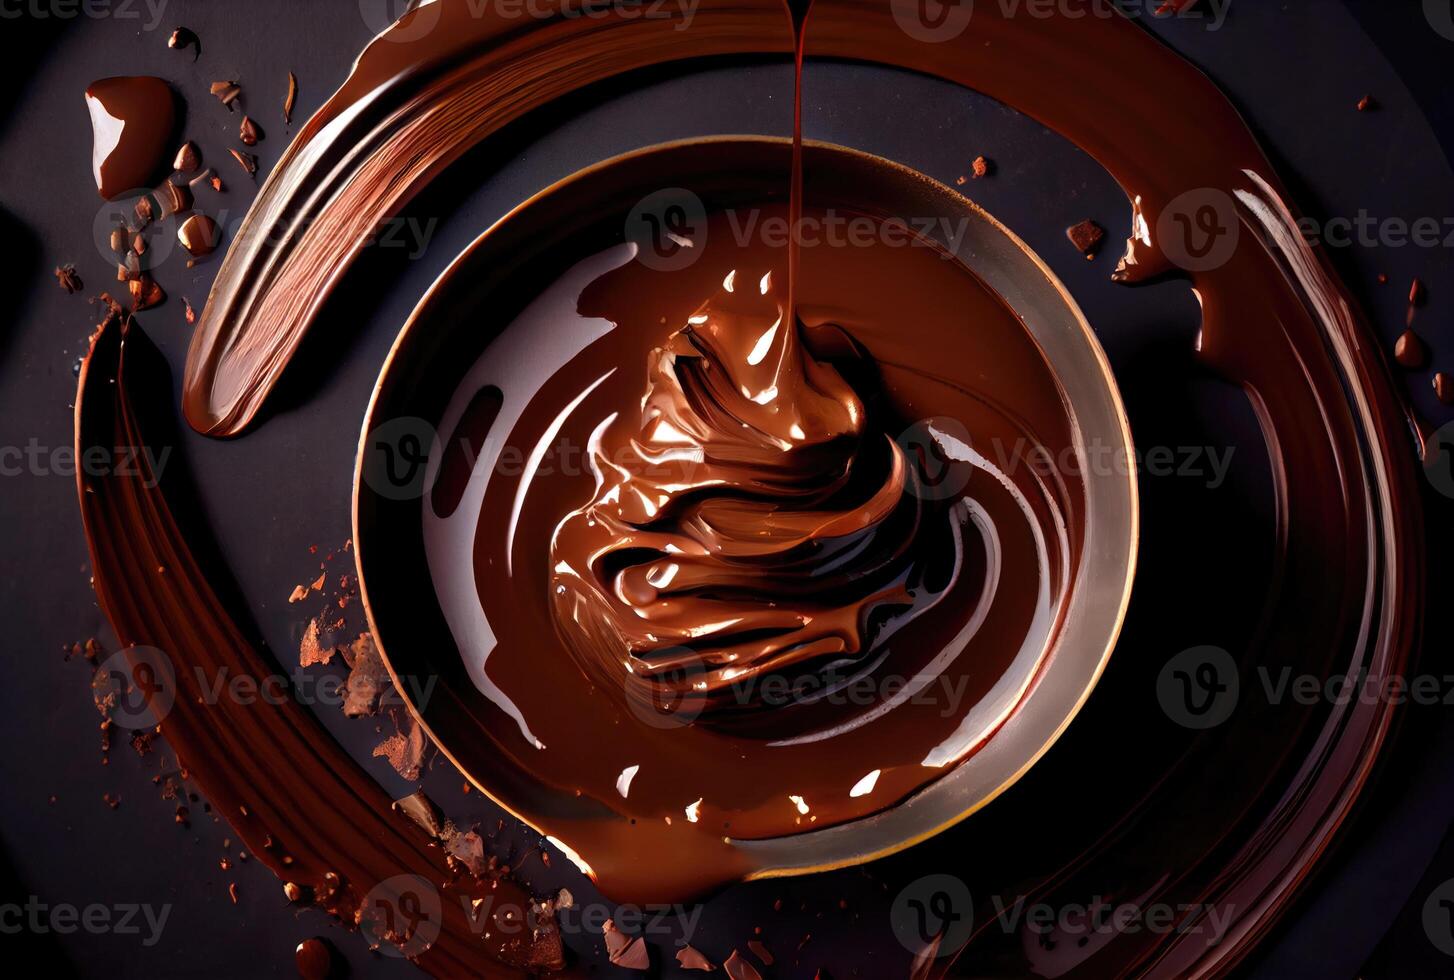 Pour the chocolate over the cake. Food and cooking concept. photo